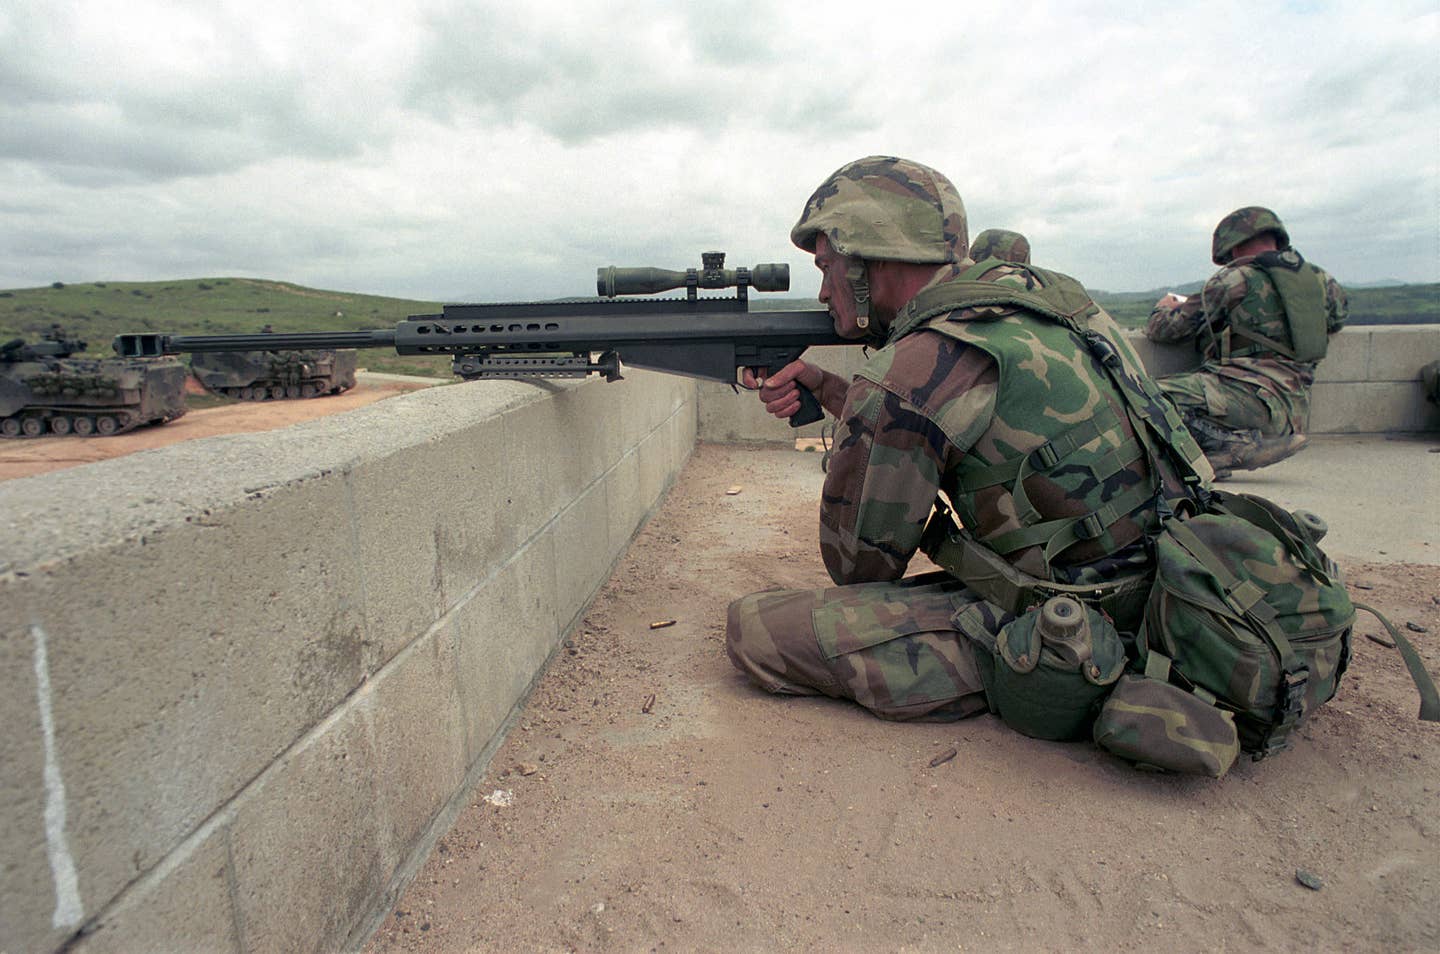 US Marine Corps (USMC) Corporal (CPL) Joe Rattlif sites through the scope mounted to a 12.7mm .50 in Barrett Light Fifty Model 82A1 sniping rifle, while training at the Military Operations in Urban Terrain (MOUT) facility, Camp Pendleton, California (CA), during Exercise KERNEL BLITZ 2001. (USMC photo)